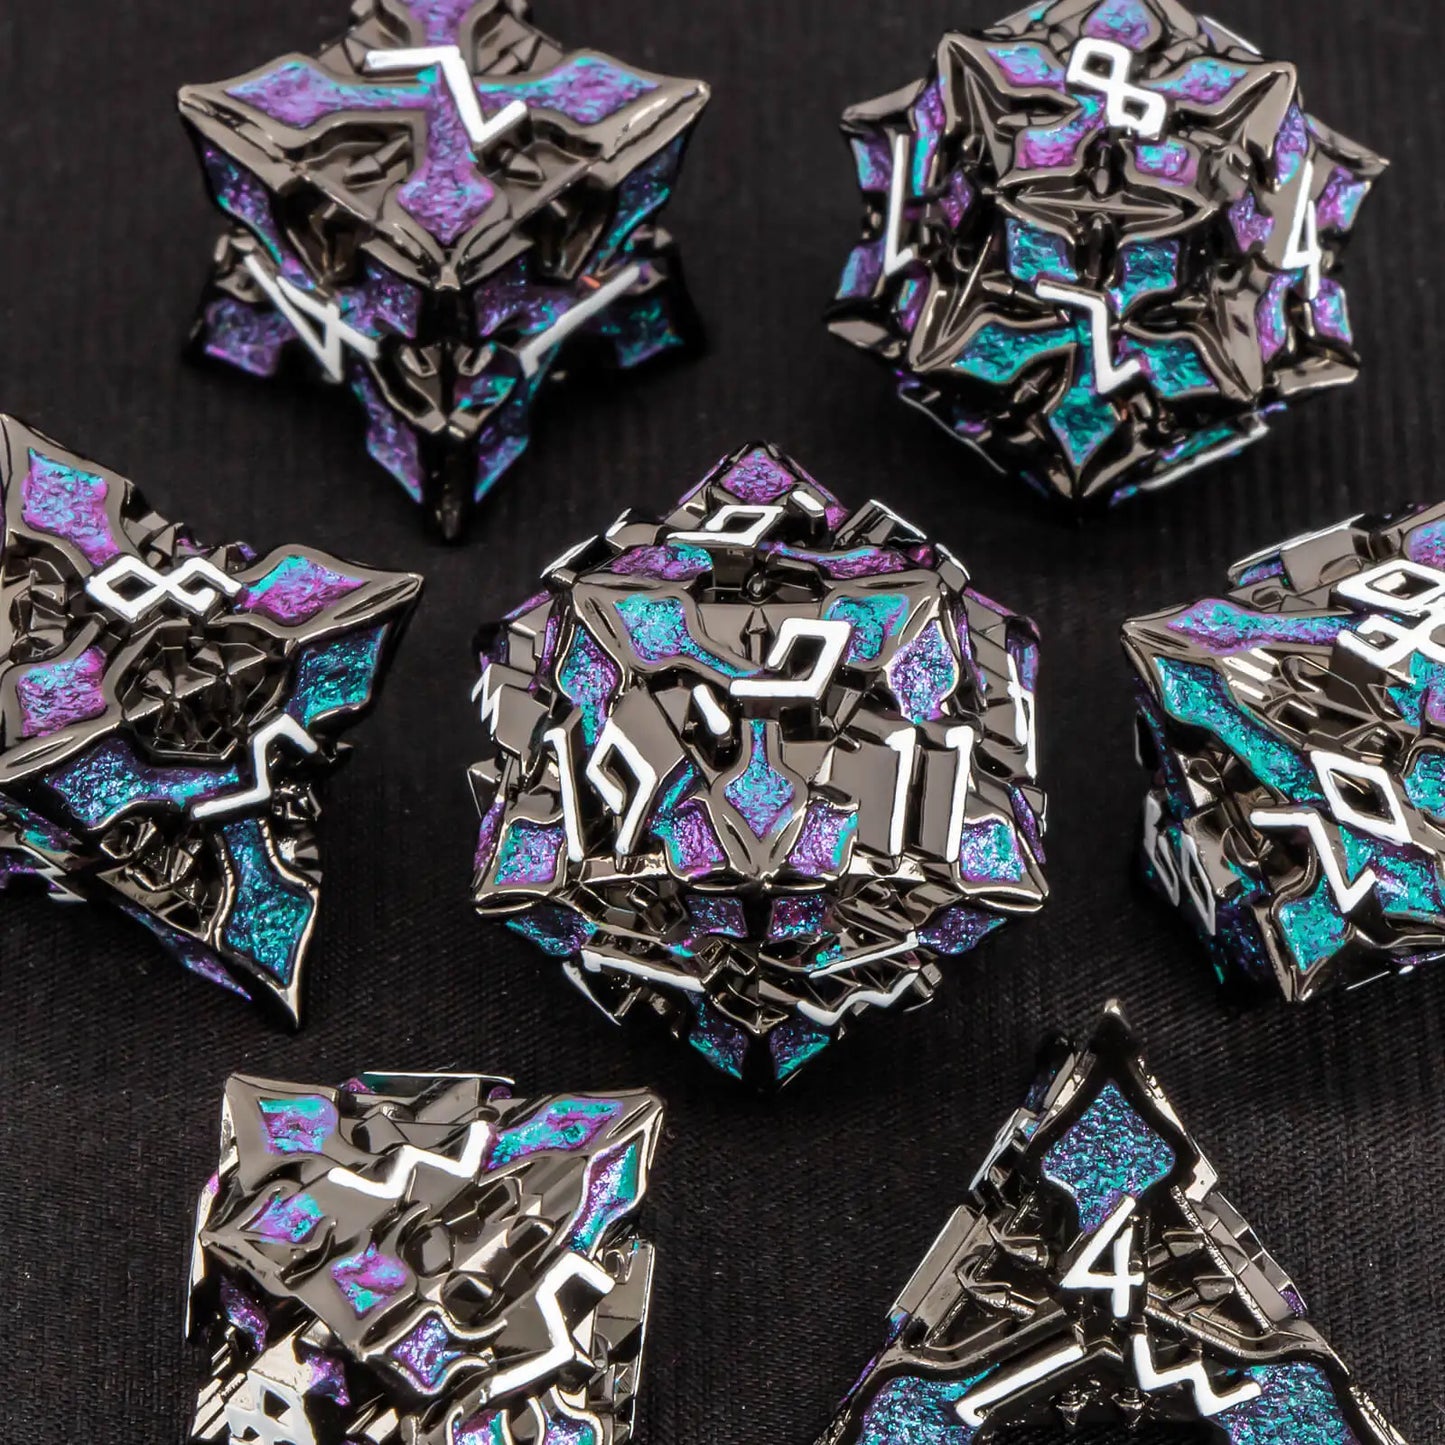 KERWELLSI 7Pcs DND Metal Dice Set D&D, Polyhedral Role Playing D and D Dice, Rainbow Dungeon and Dragon RPG Dice HJ-05 CHINA